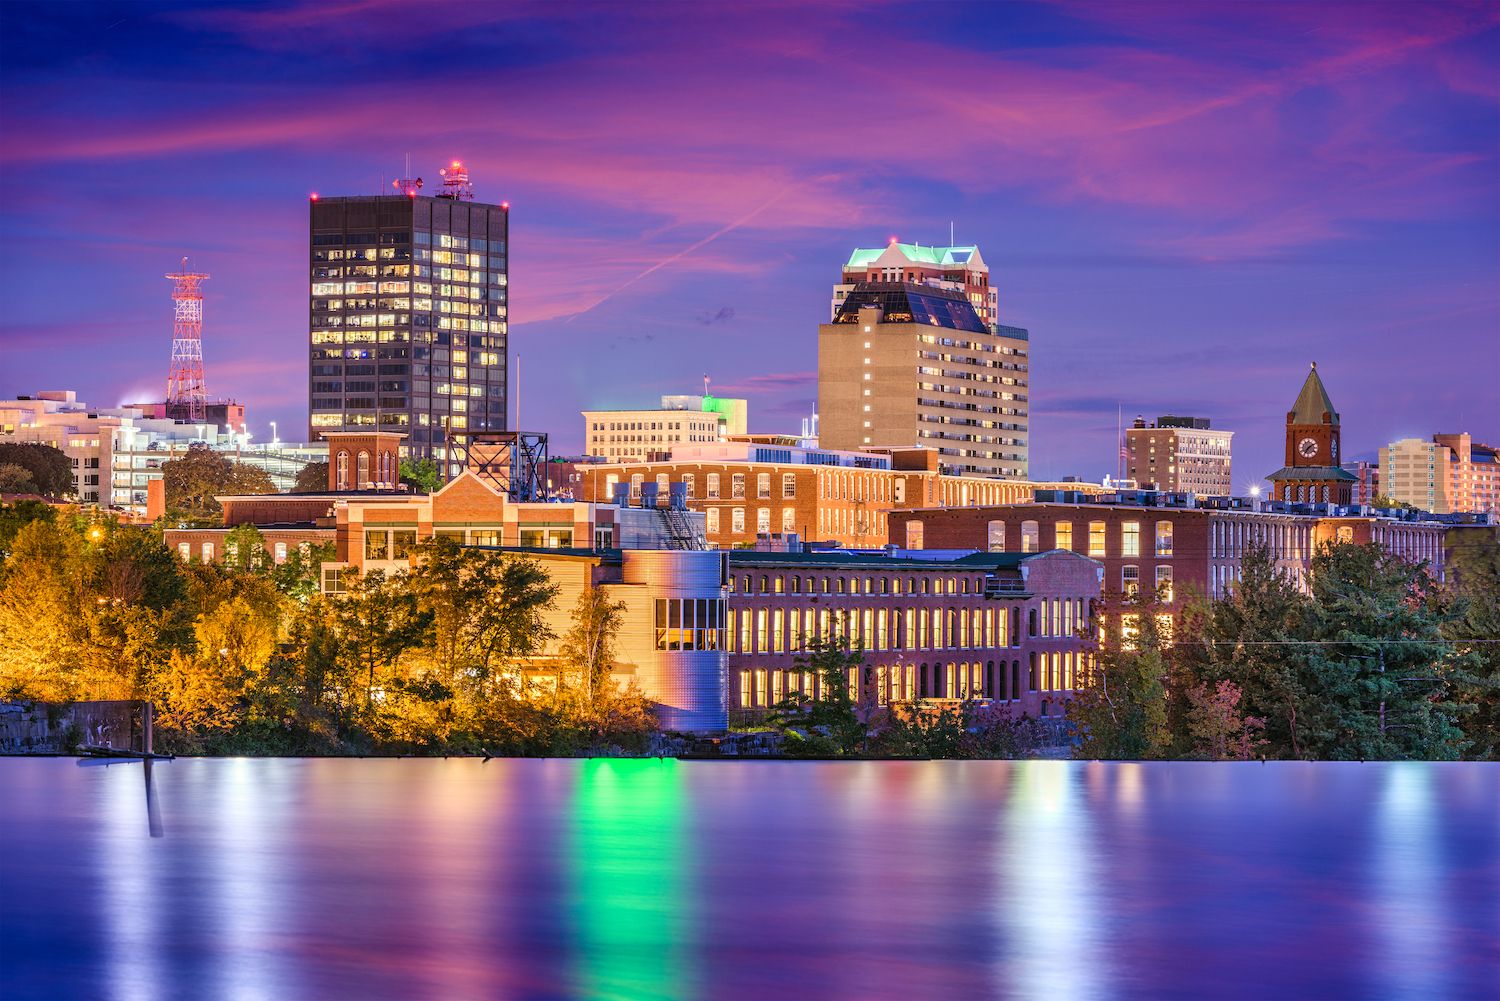 14 Best Things to Do in Manchester, NH